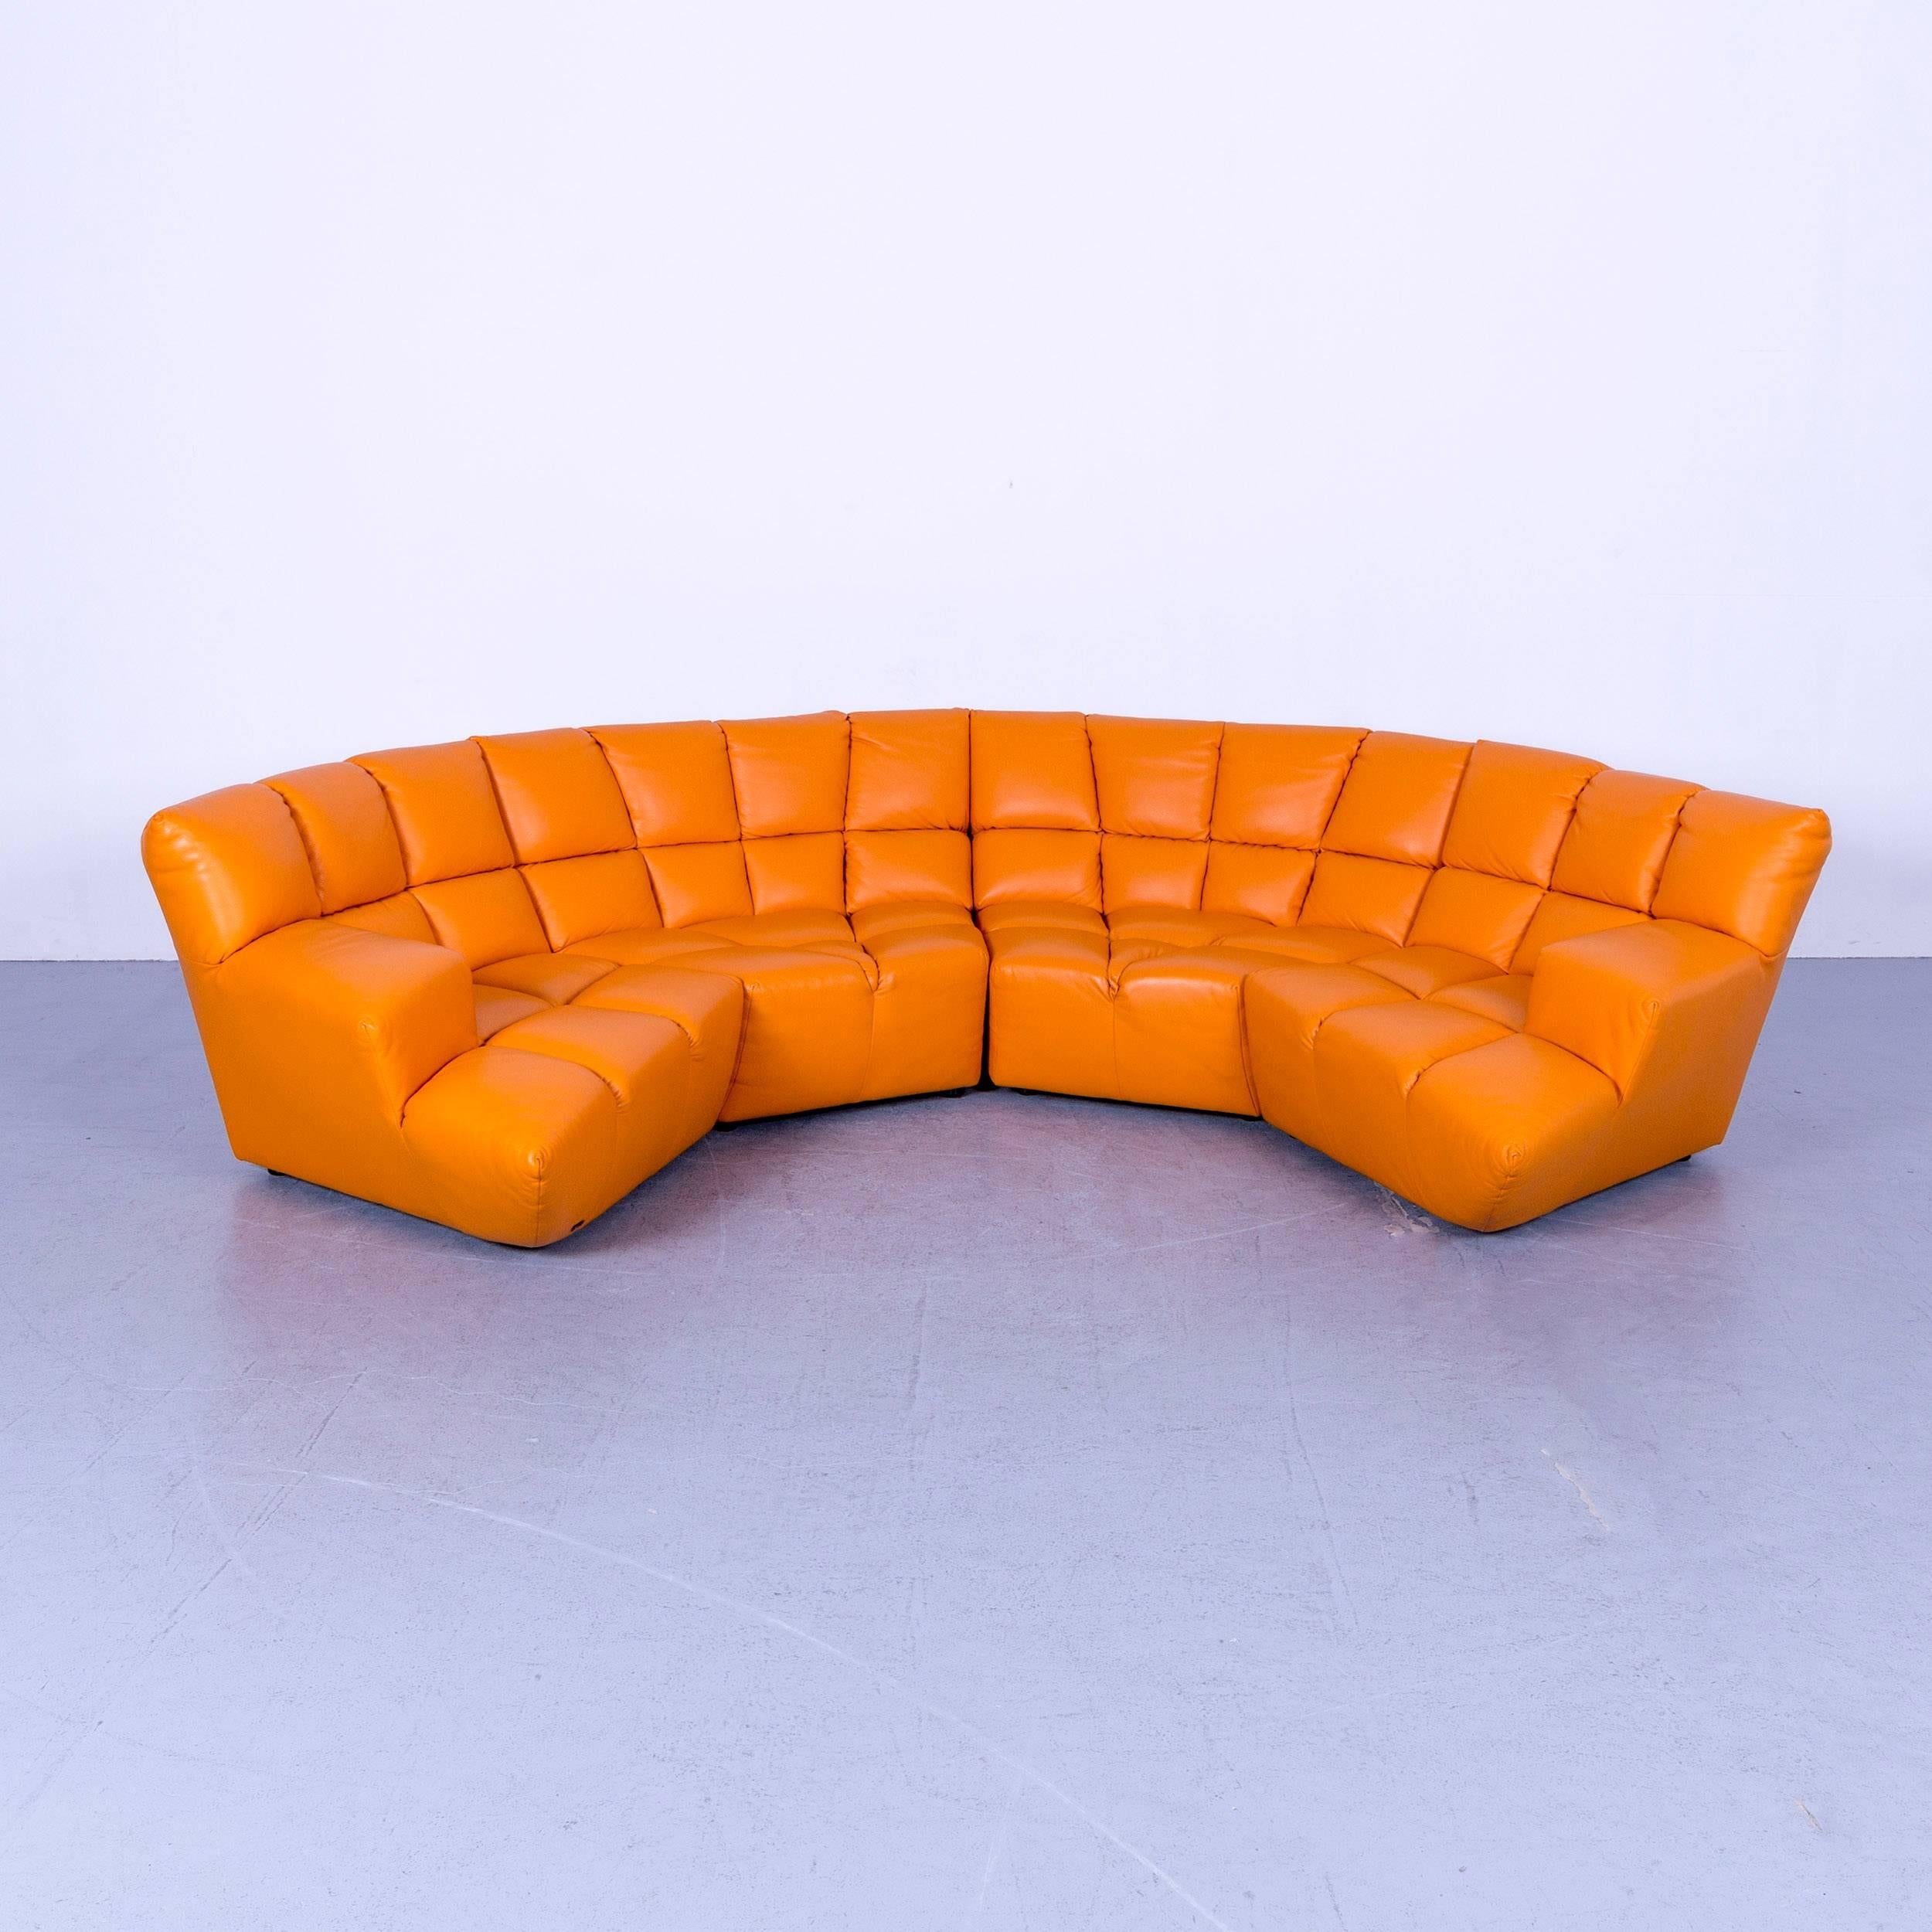 We offer delivery options to most destinations on earth. Find our shipping quotes at the bottom of this page in the shipping section.

An Bretz Cloud 7 Designer Cornersofa Orange Leather Couch 

Shipping:

An on point shipping process is our